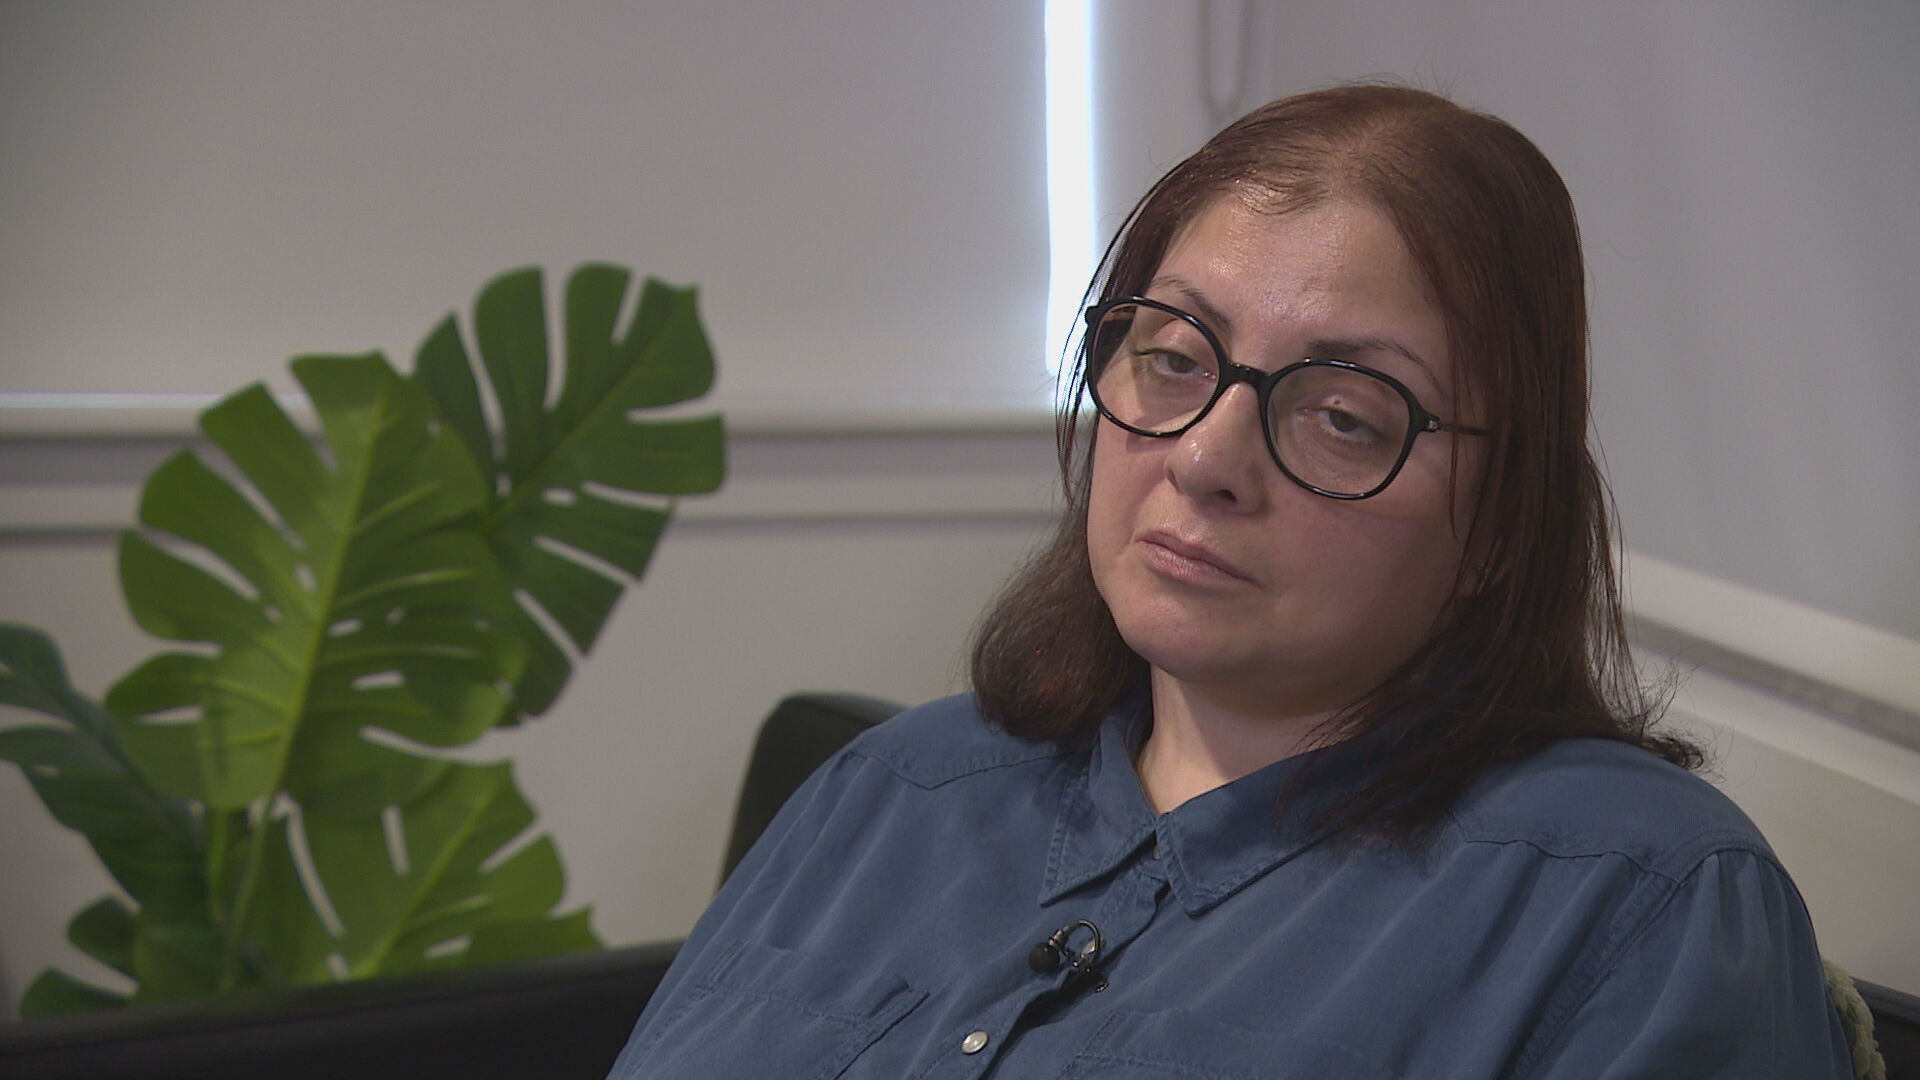 Zahada Safdar is worried about the chancellor's push to get those with health conditions back into work.